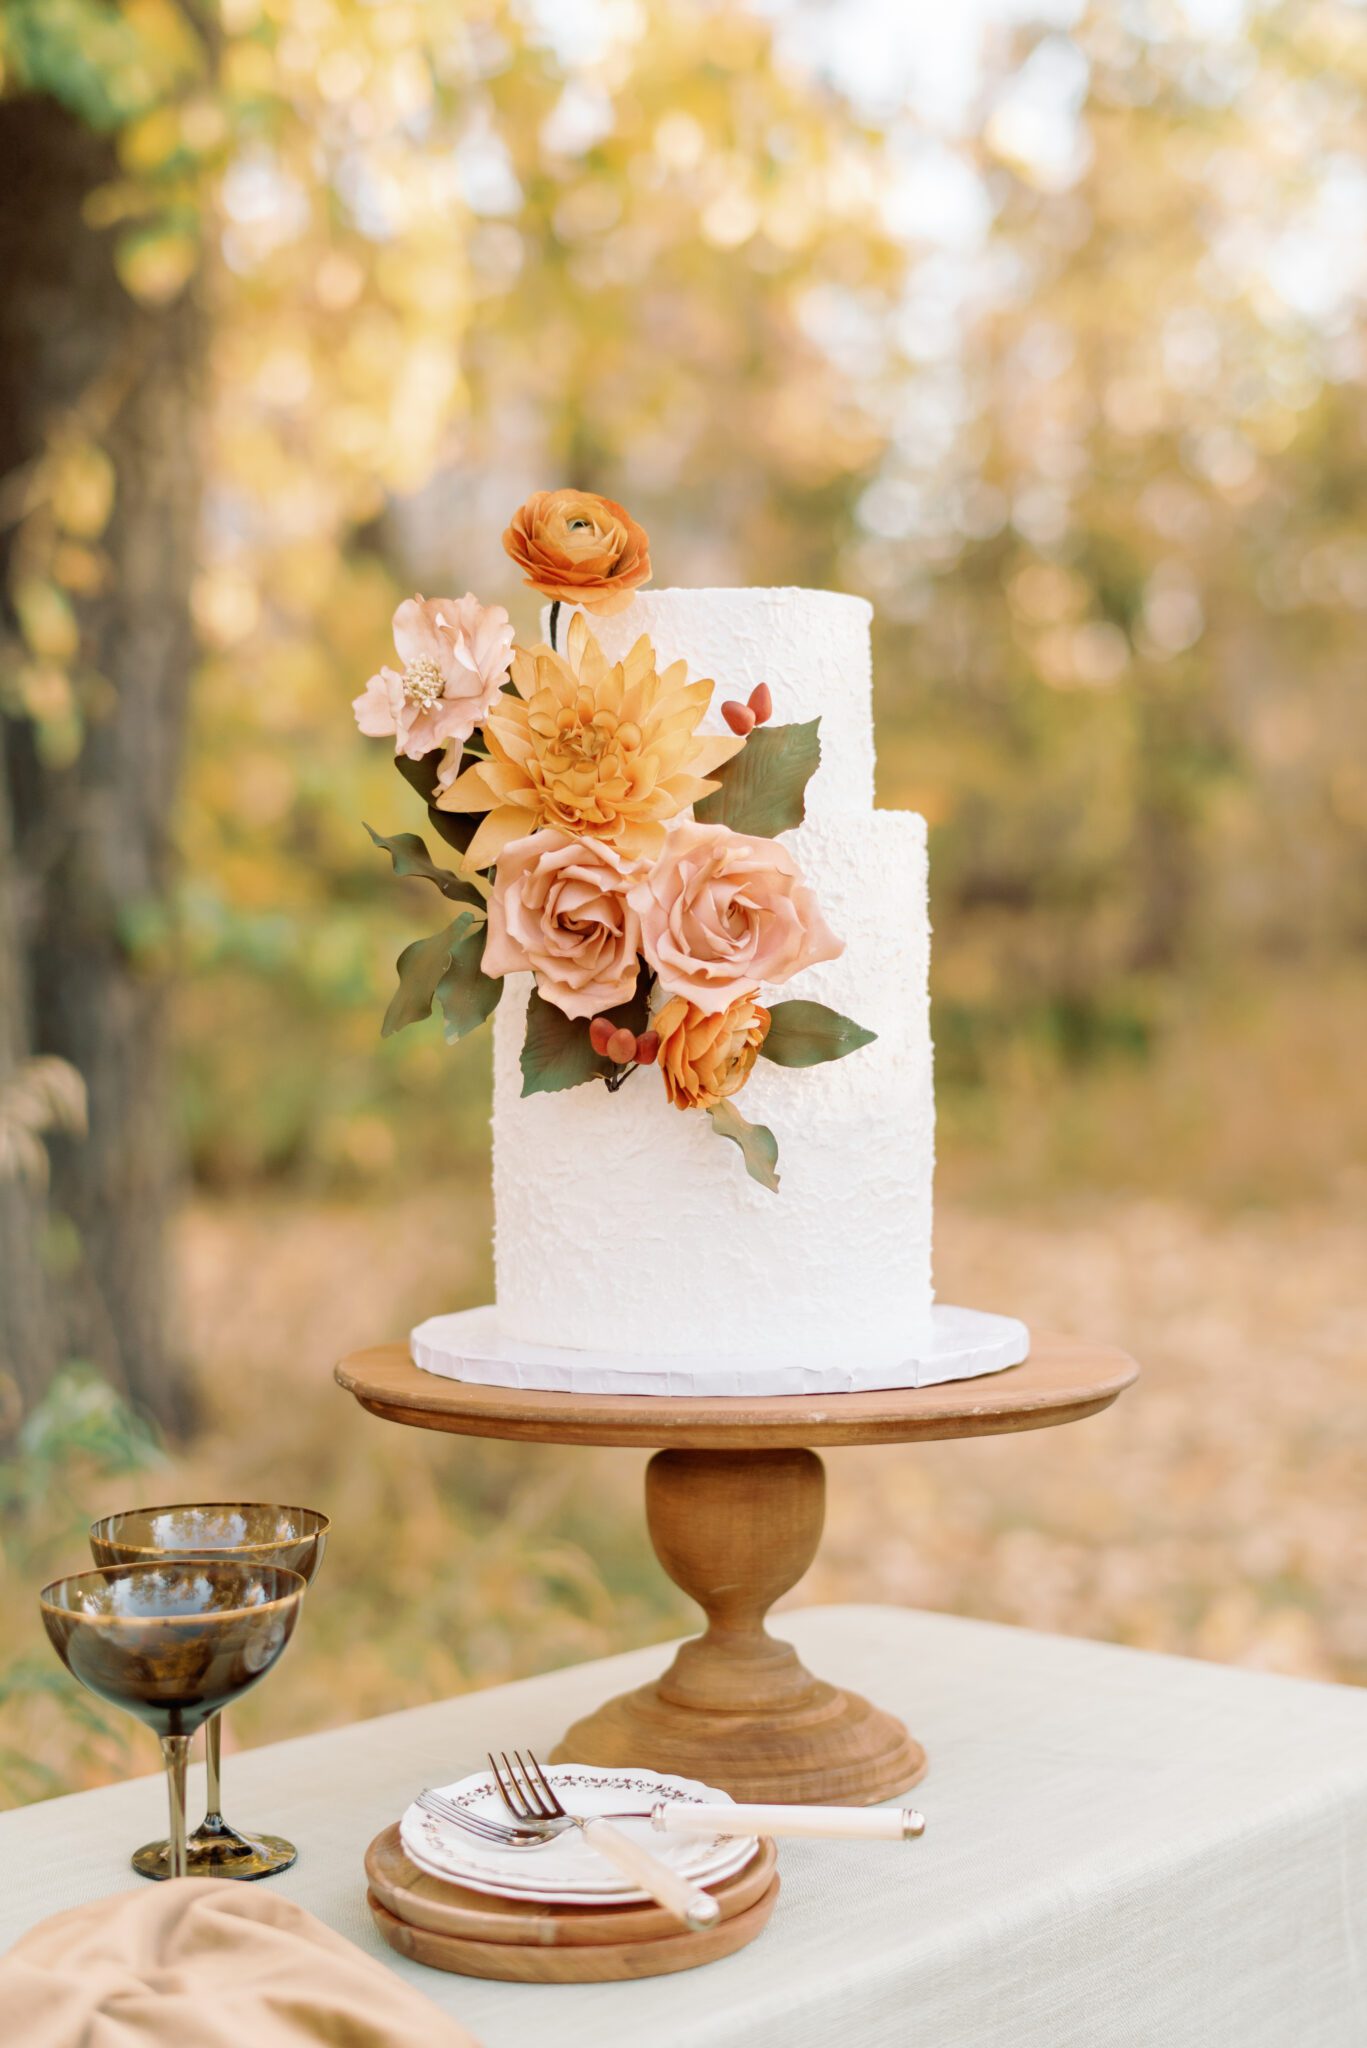 Fall inspired two-tier textured wedding cake with handmade sugar flowers, created by Yvonne's Delightful Cakes.